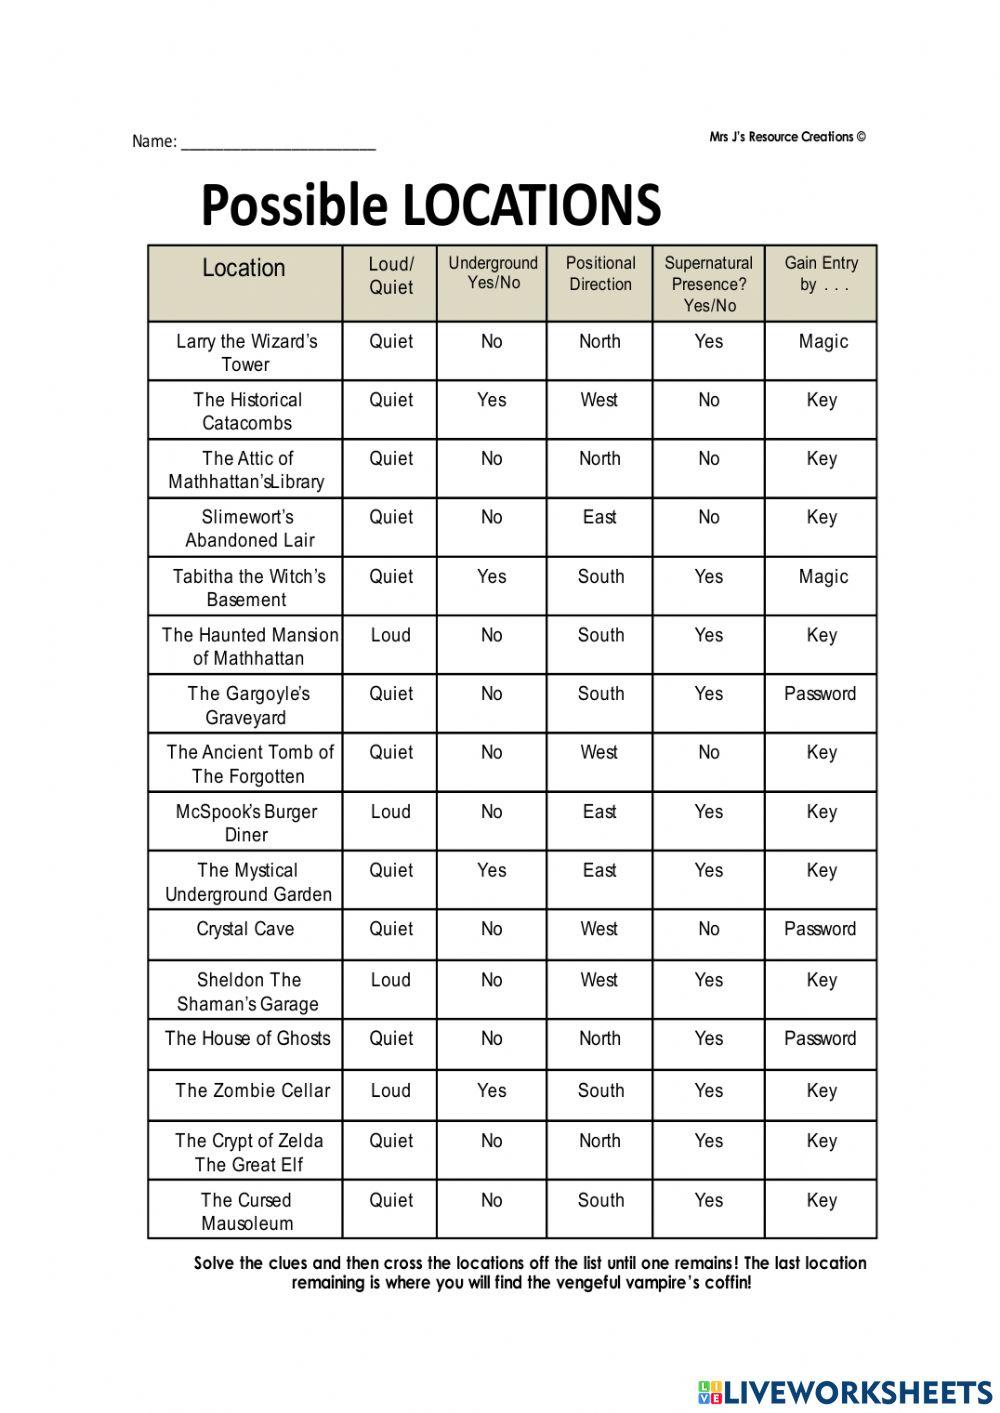 Possible Locations